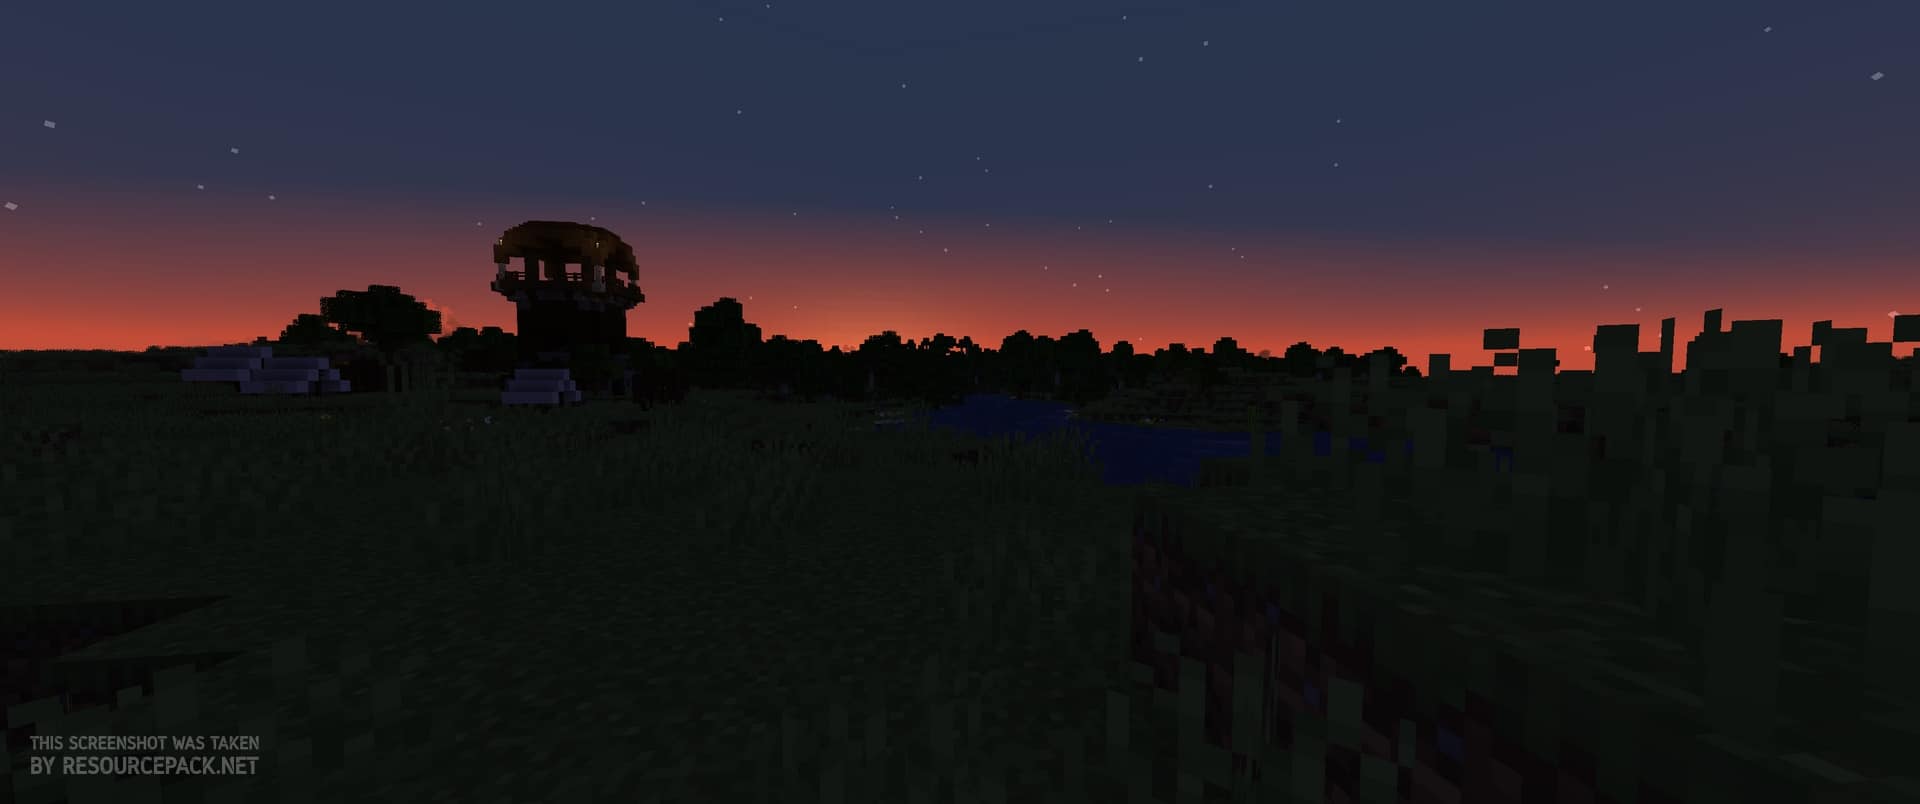 SEUS 1.17 Minecraft Shaders Free Download and Review